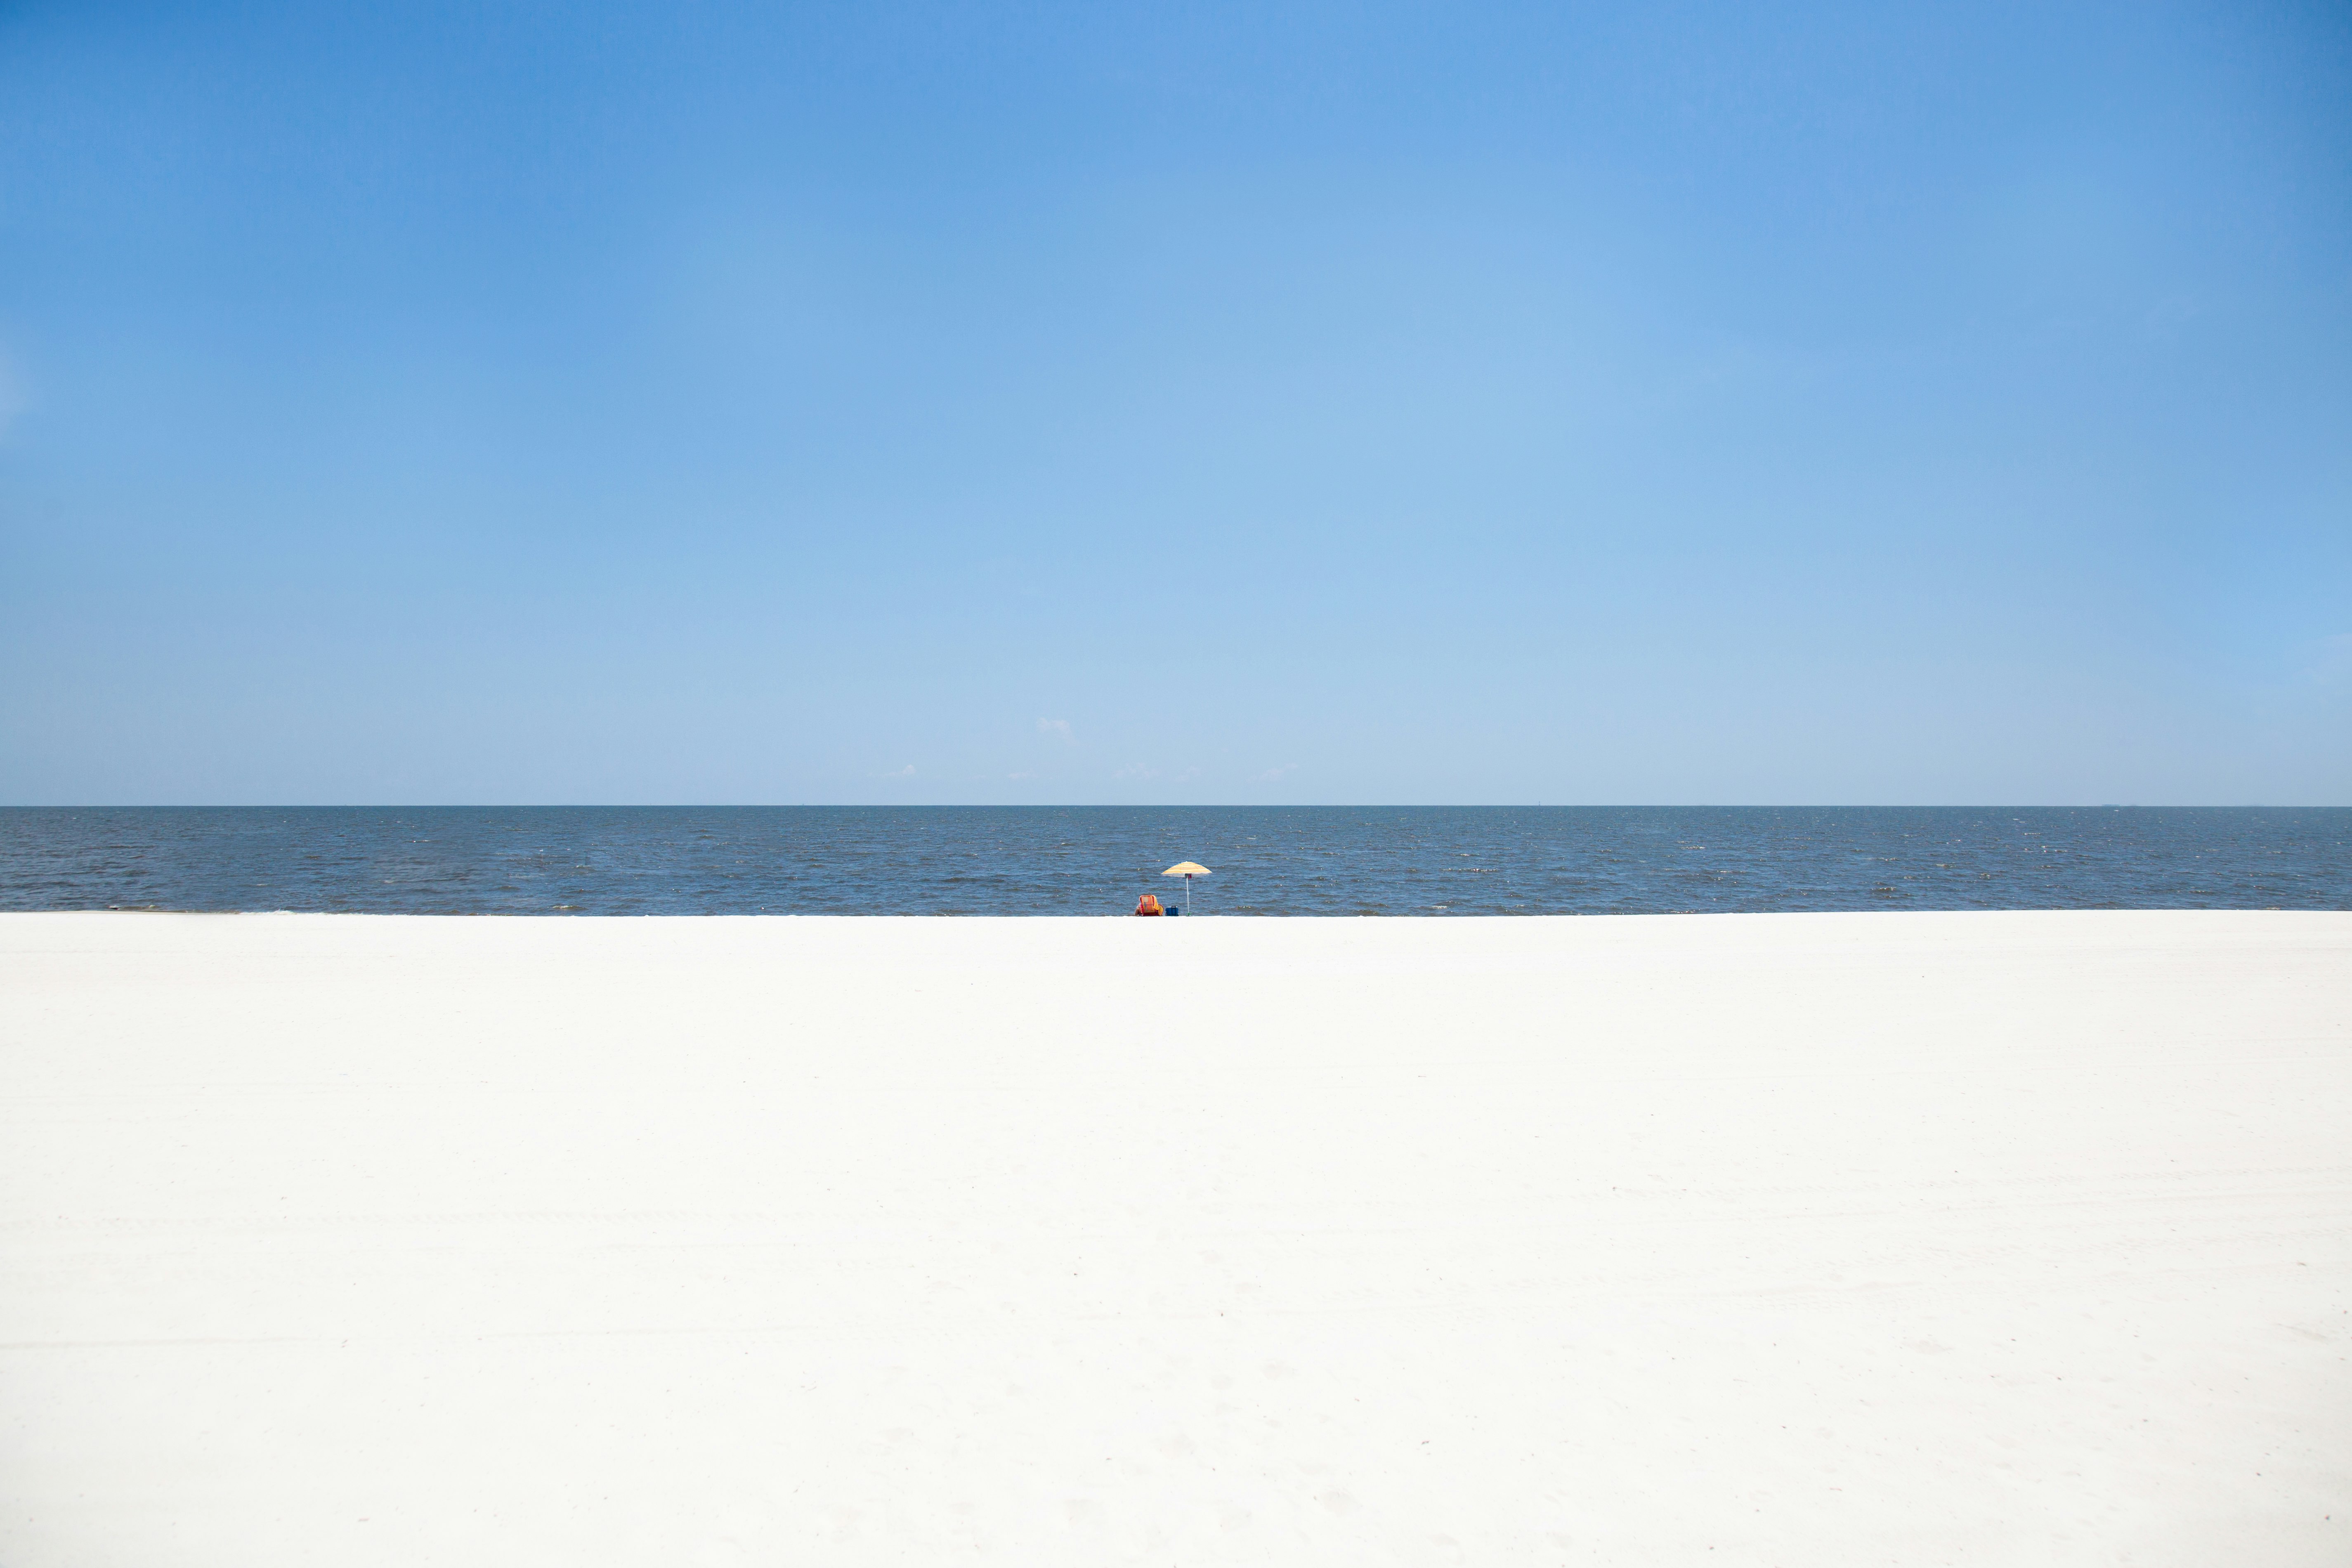 person walking on white sand beach during daytime